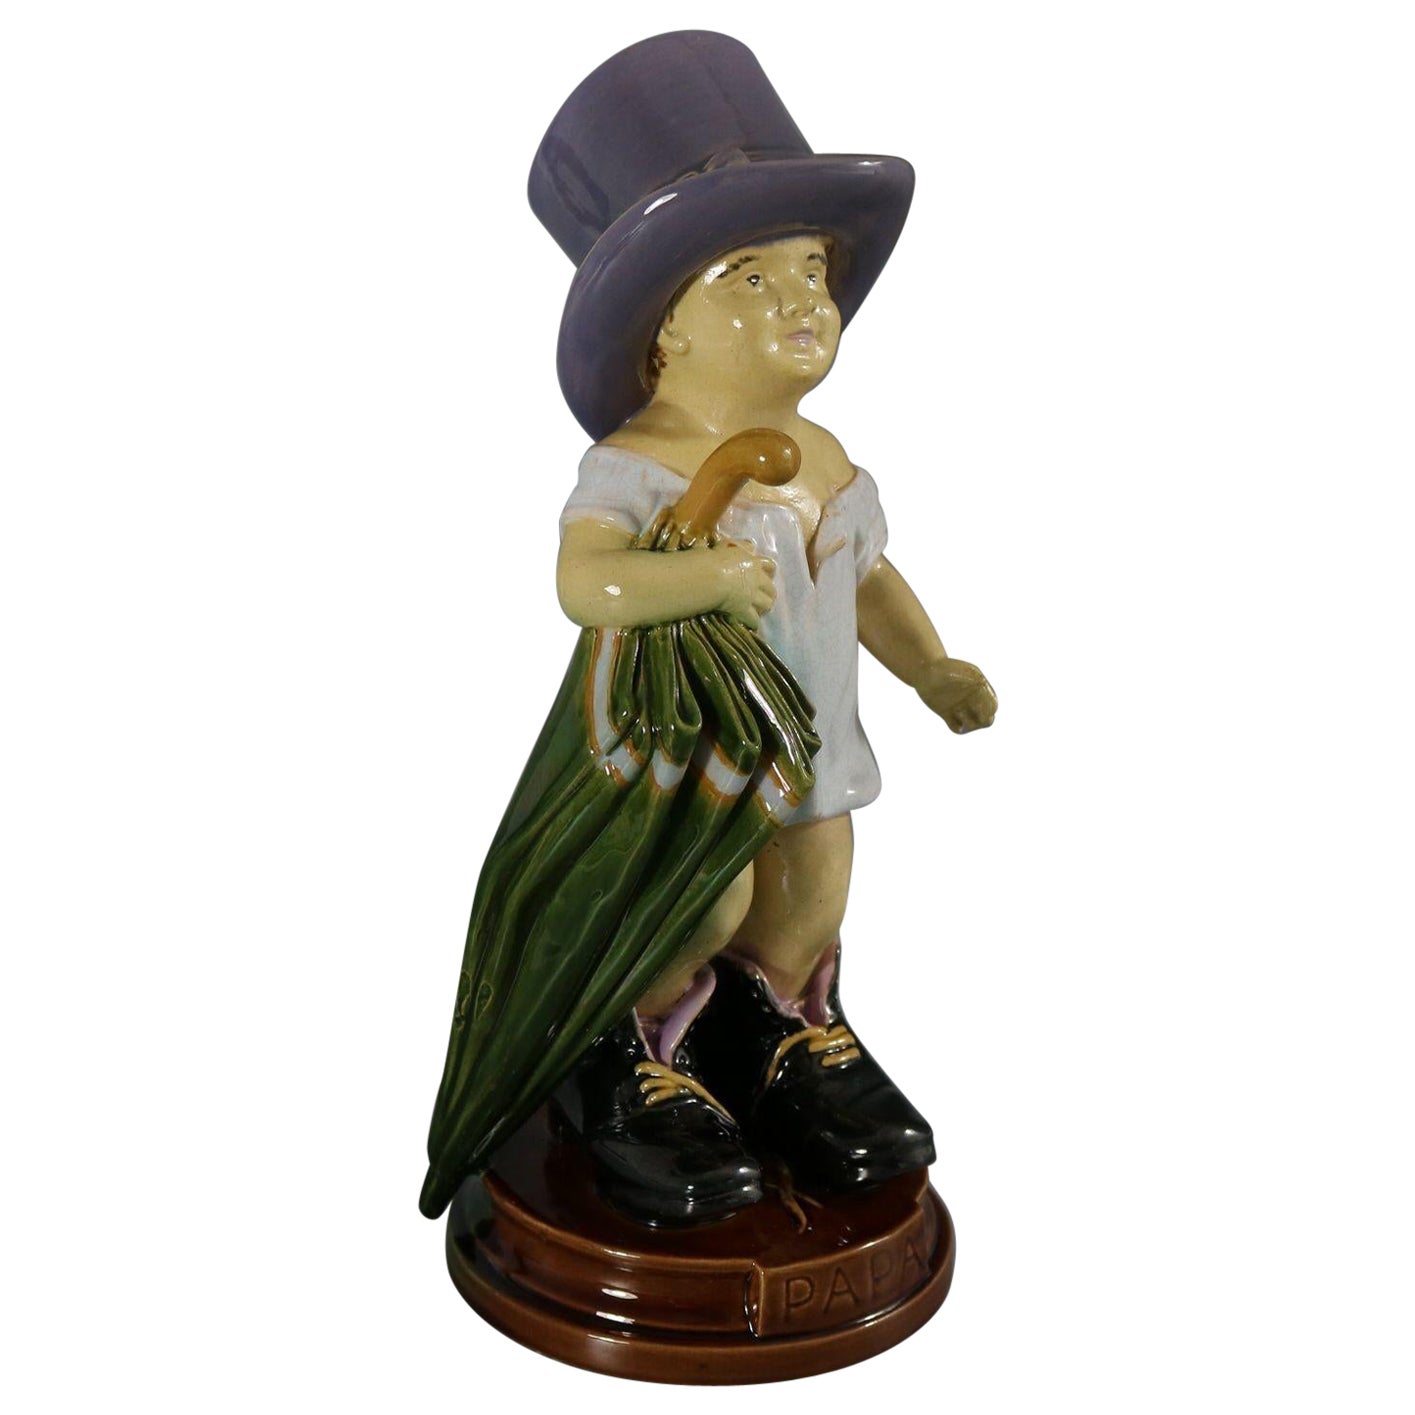 Brownfield Majolica Figure of a Child, Titled PAPA For Sale